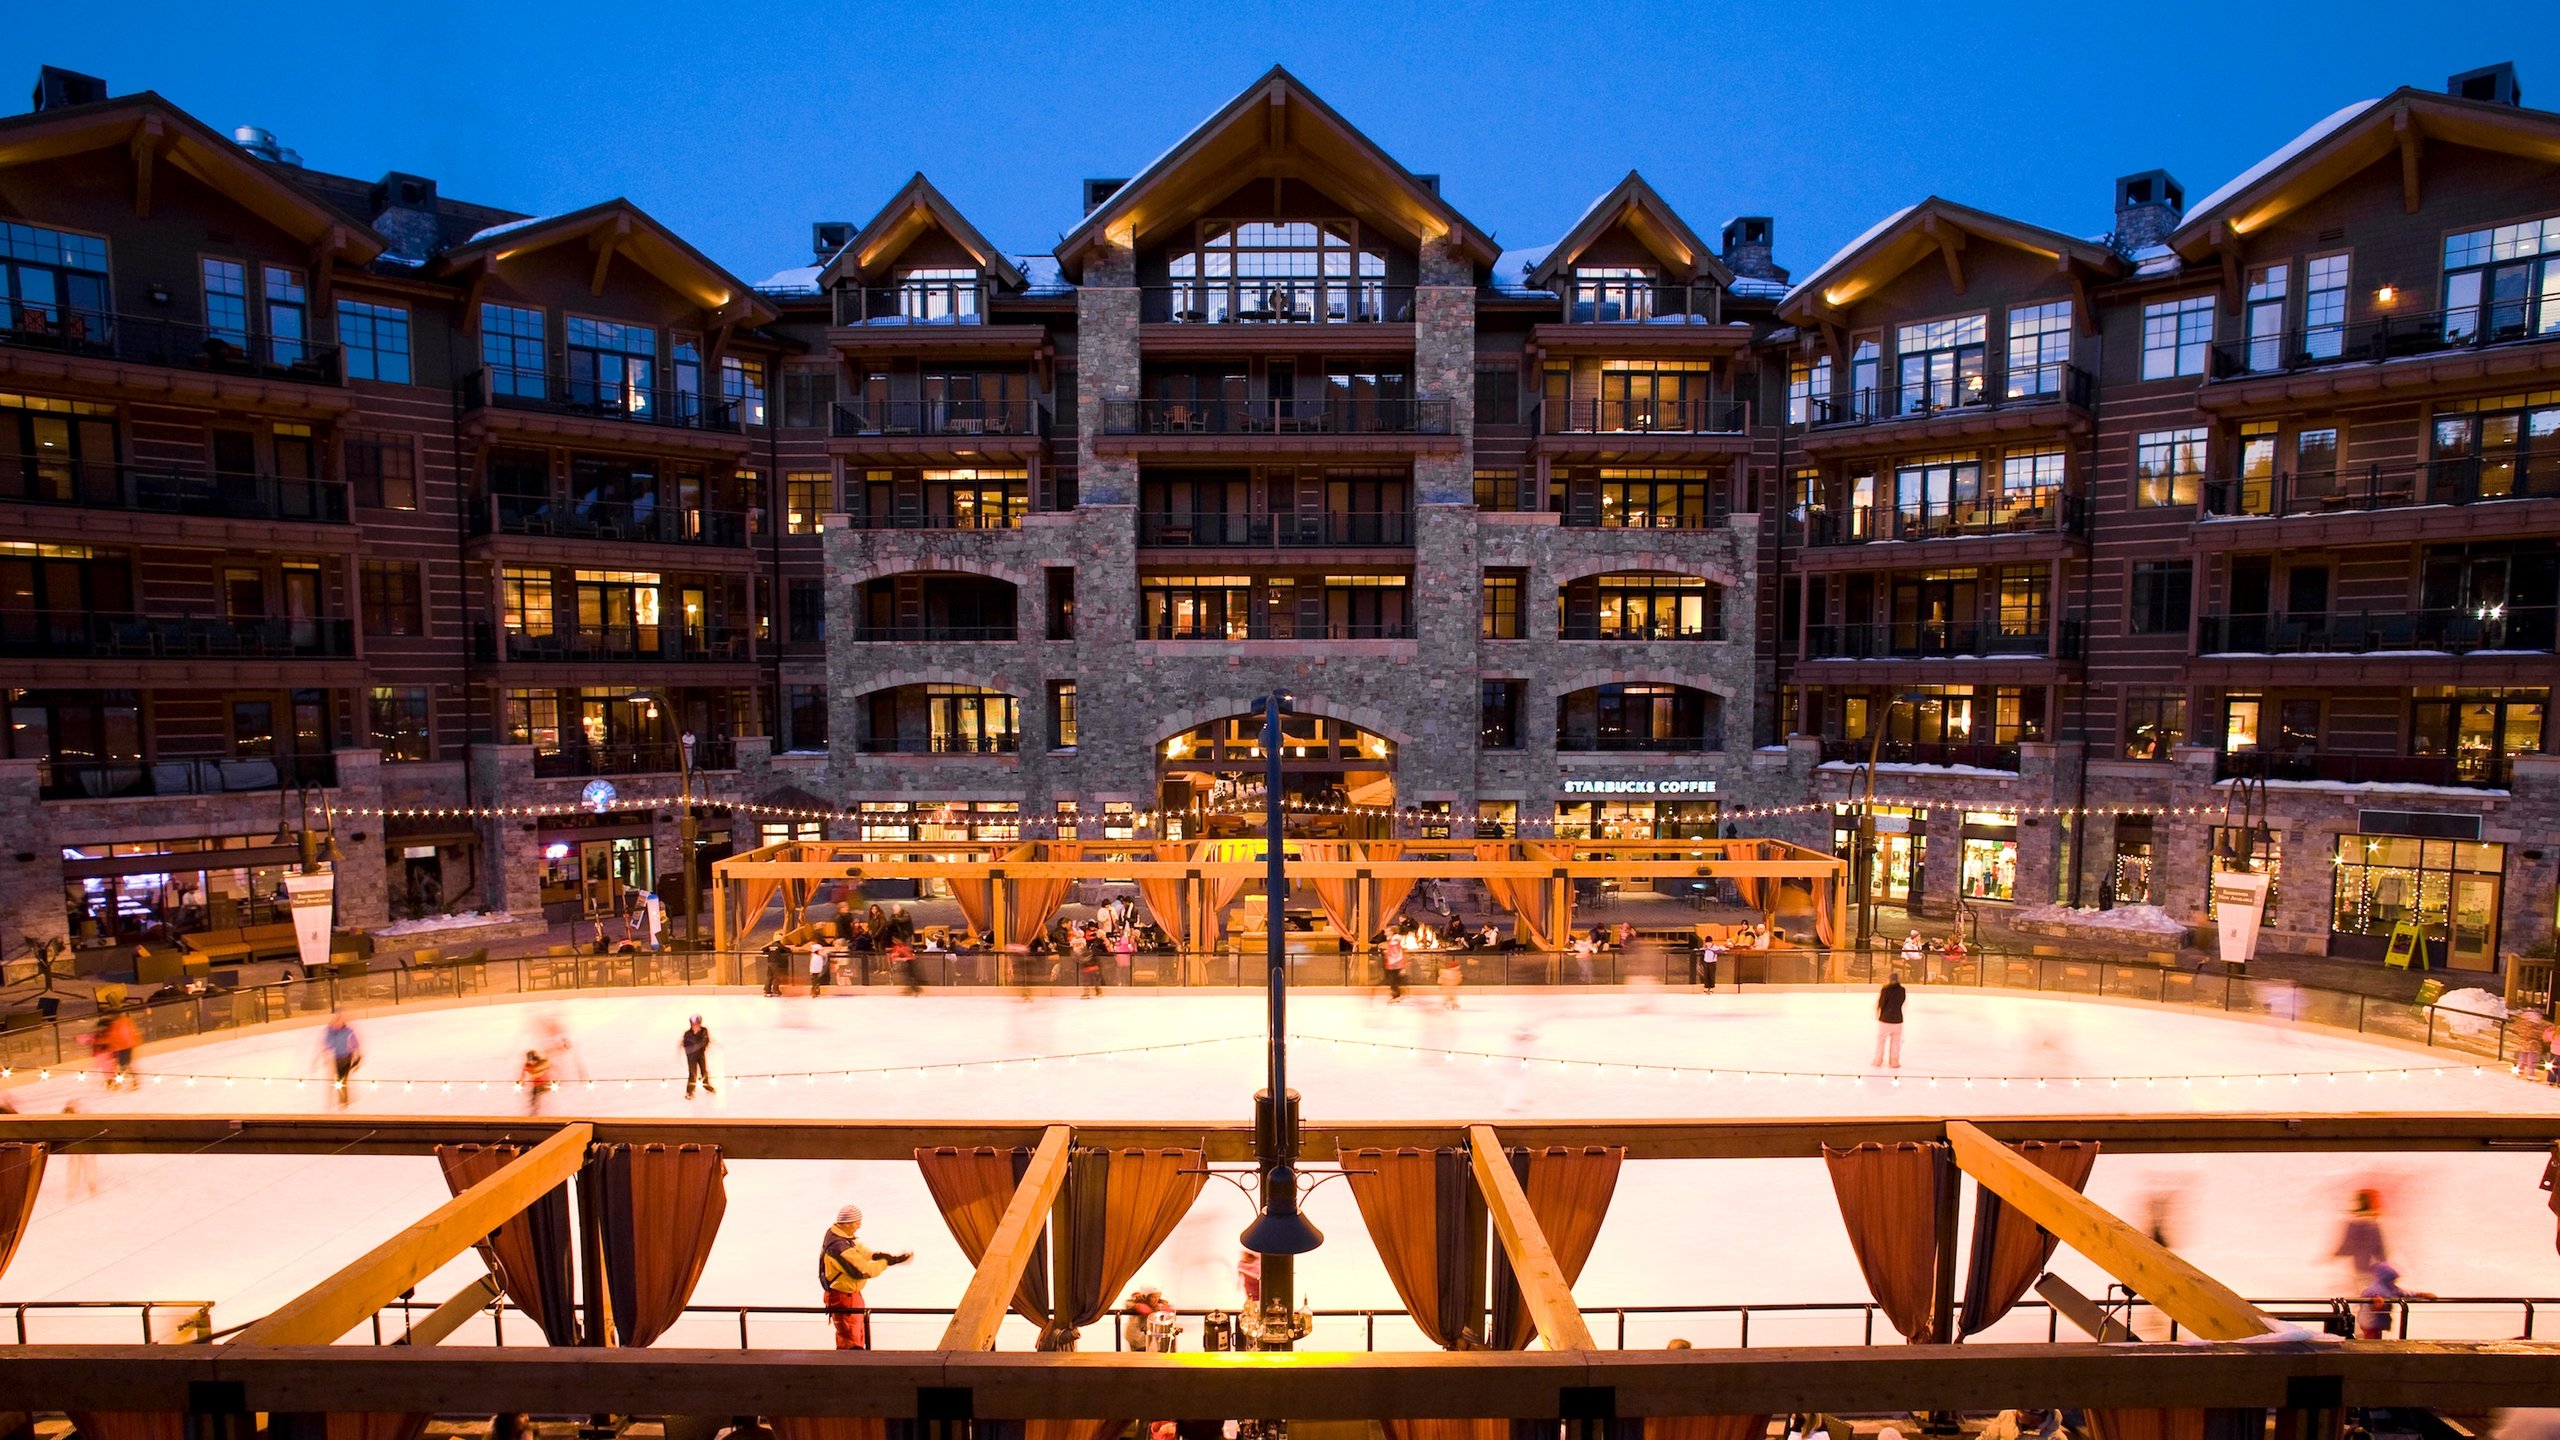 Top 10 Hotels Closest To Northstar California Resort In Lake Tahoe From 1 150 Expedia